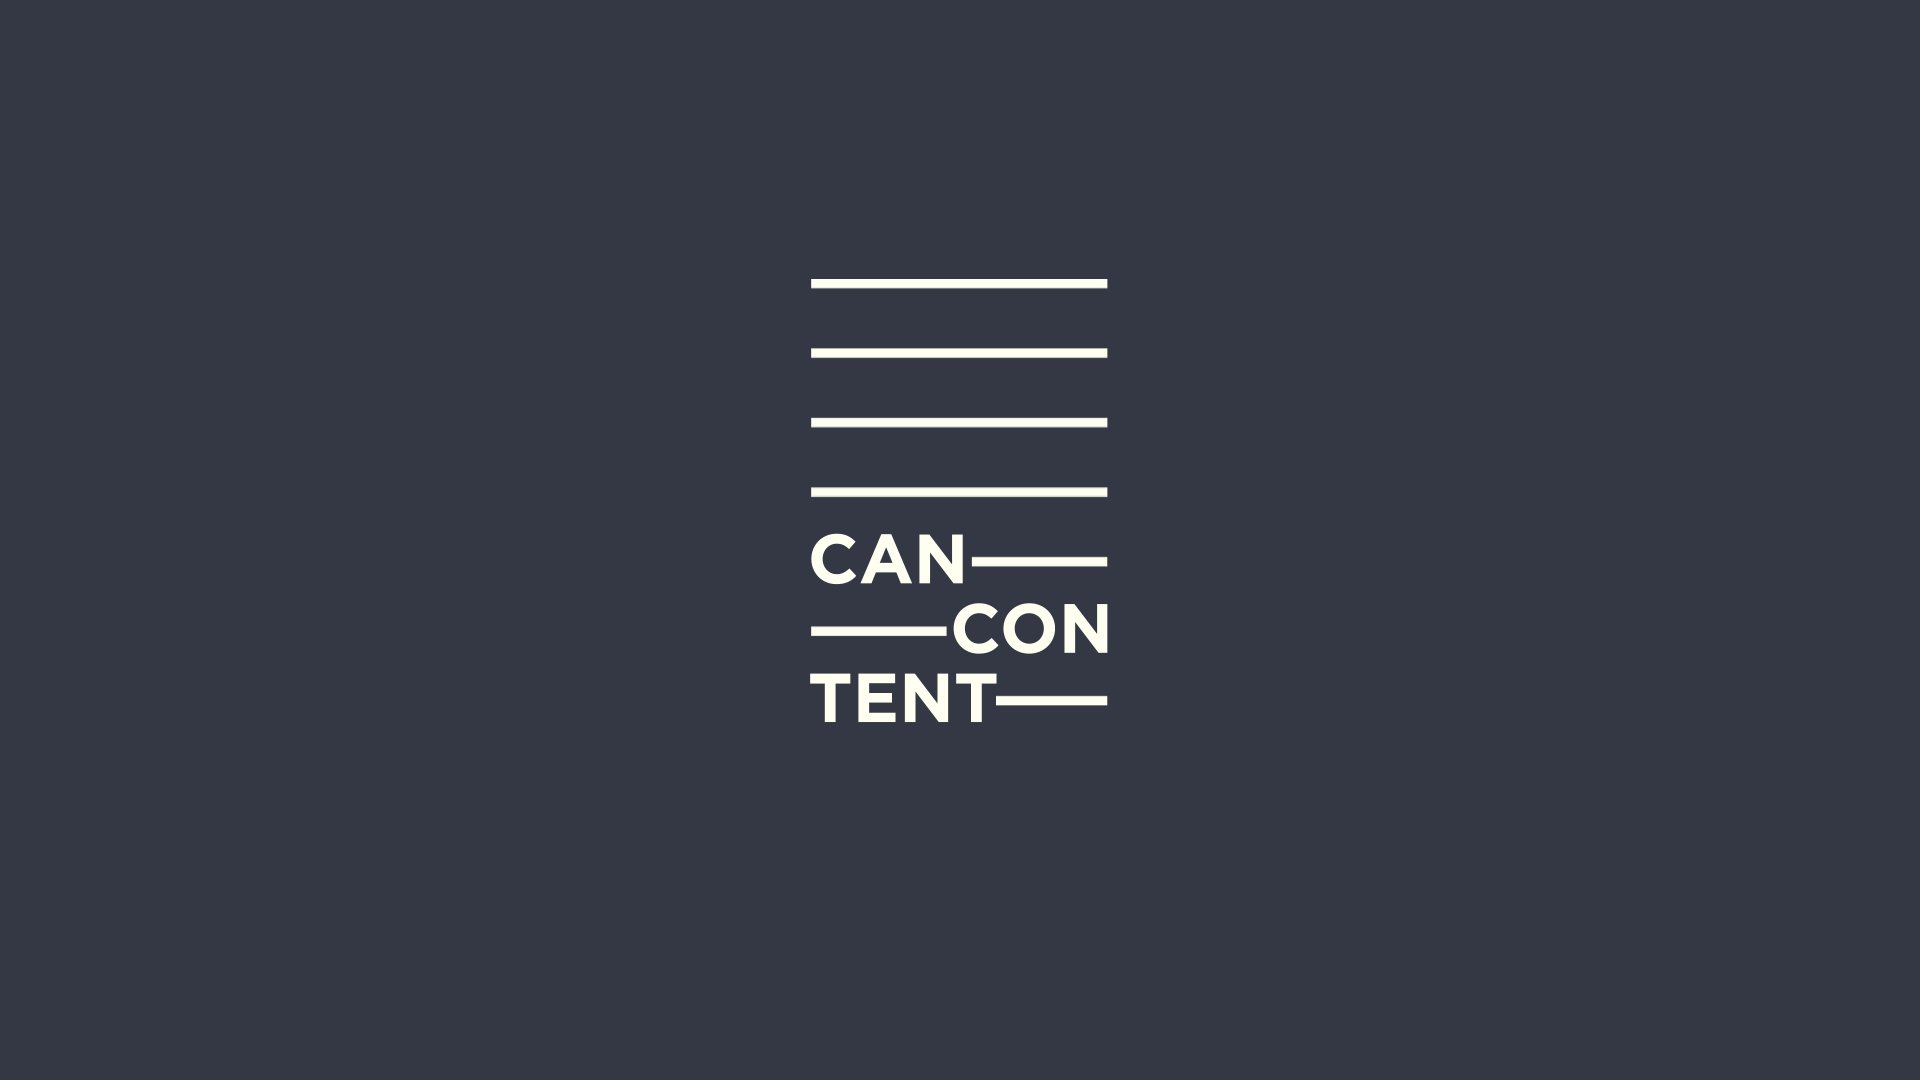 Brand identity for Cancontent film company by FUERA